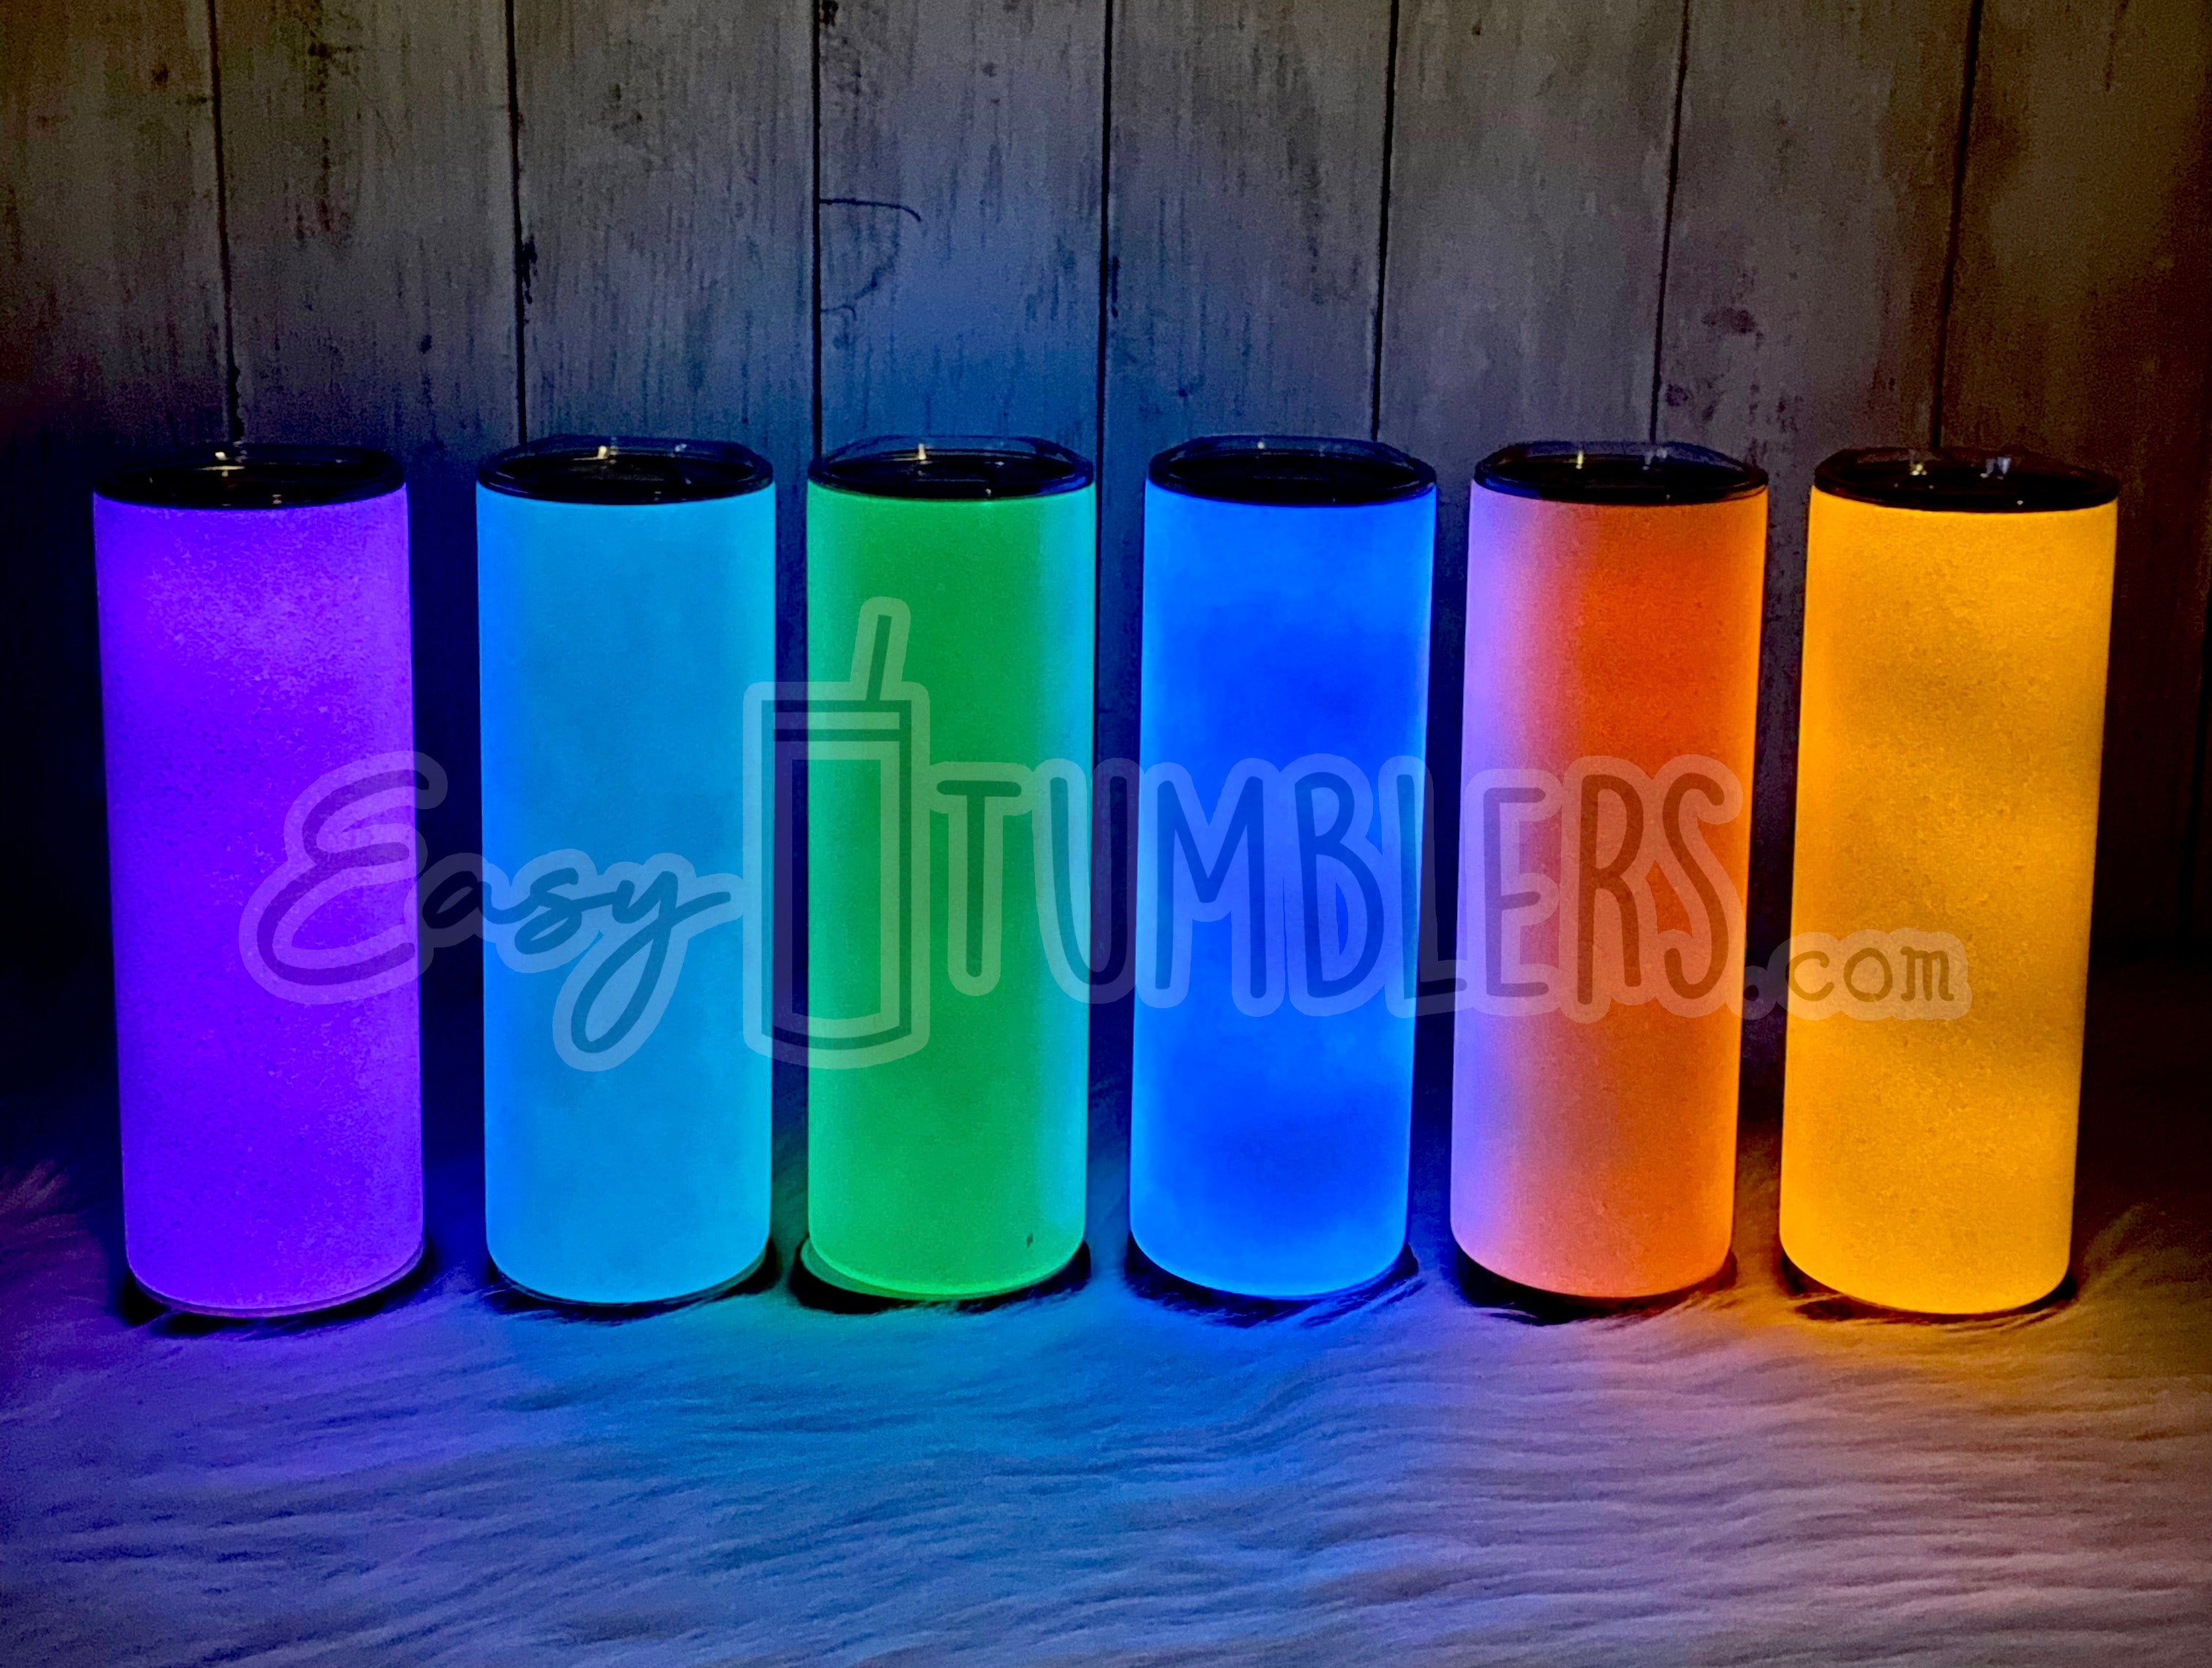 20oz Tumblers Glow in The Dark Blank White Red Coral Blue Green or Pink Stainless Steel Sublimation Tumbler w/Straw, Lid Box